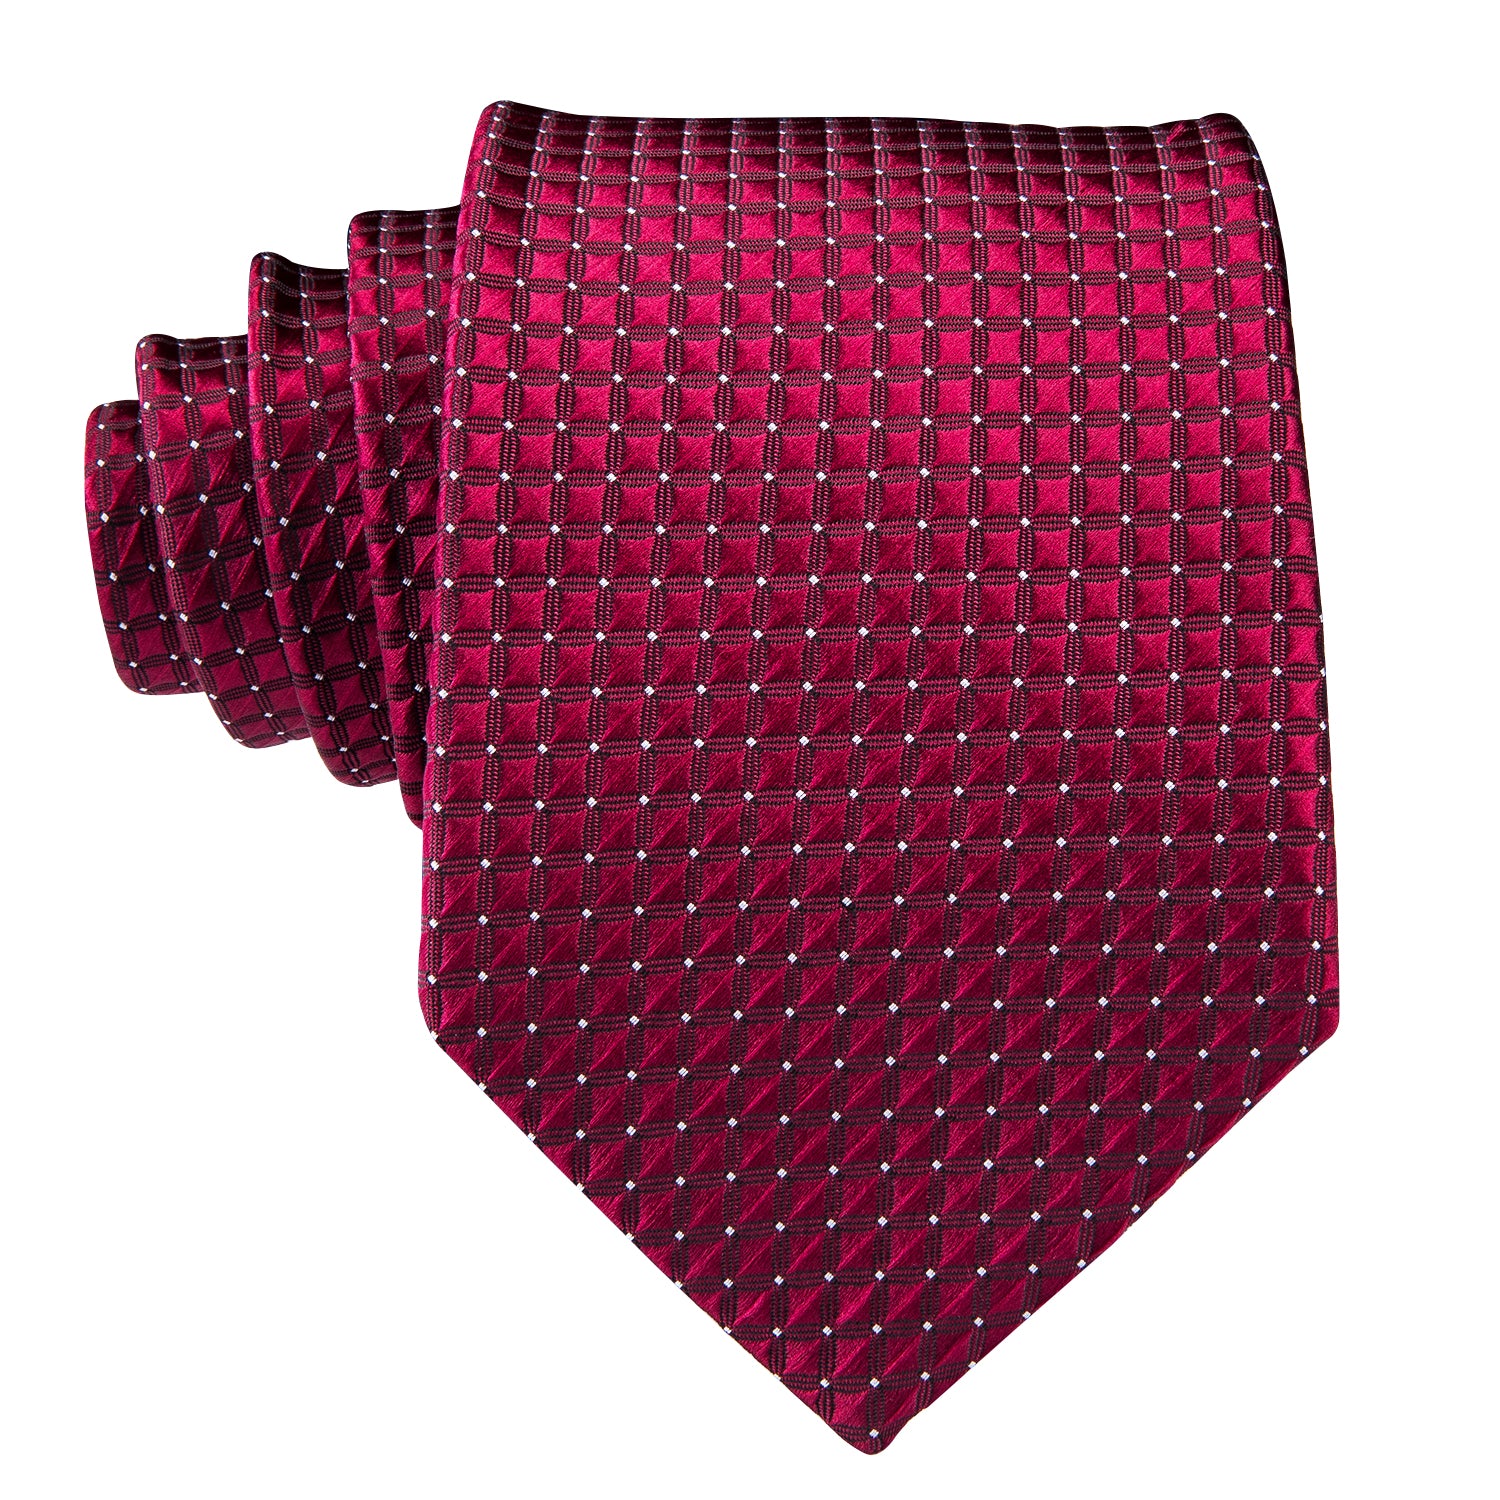 burgundy and gold tie